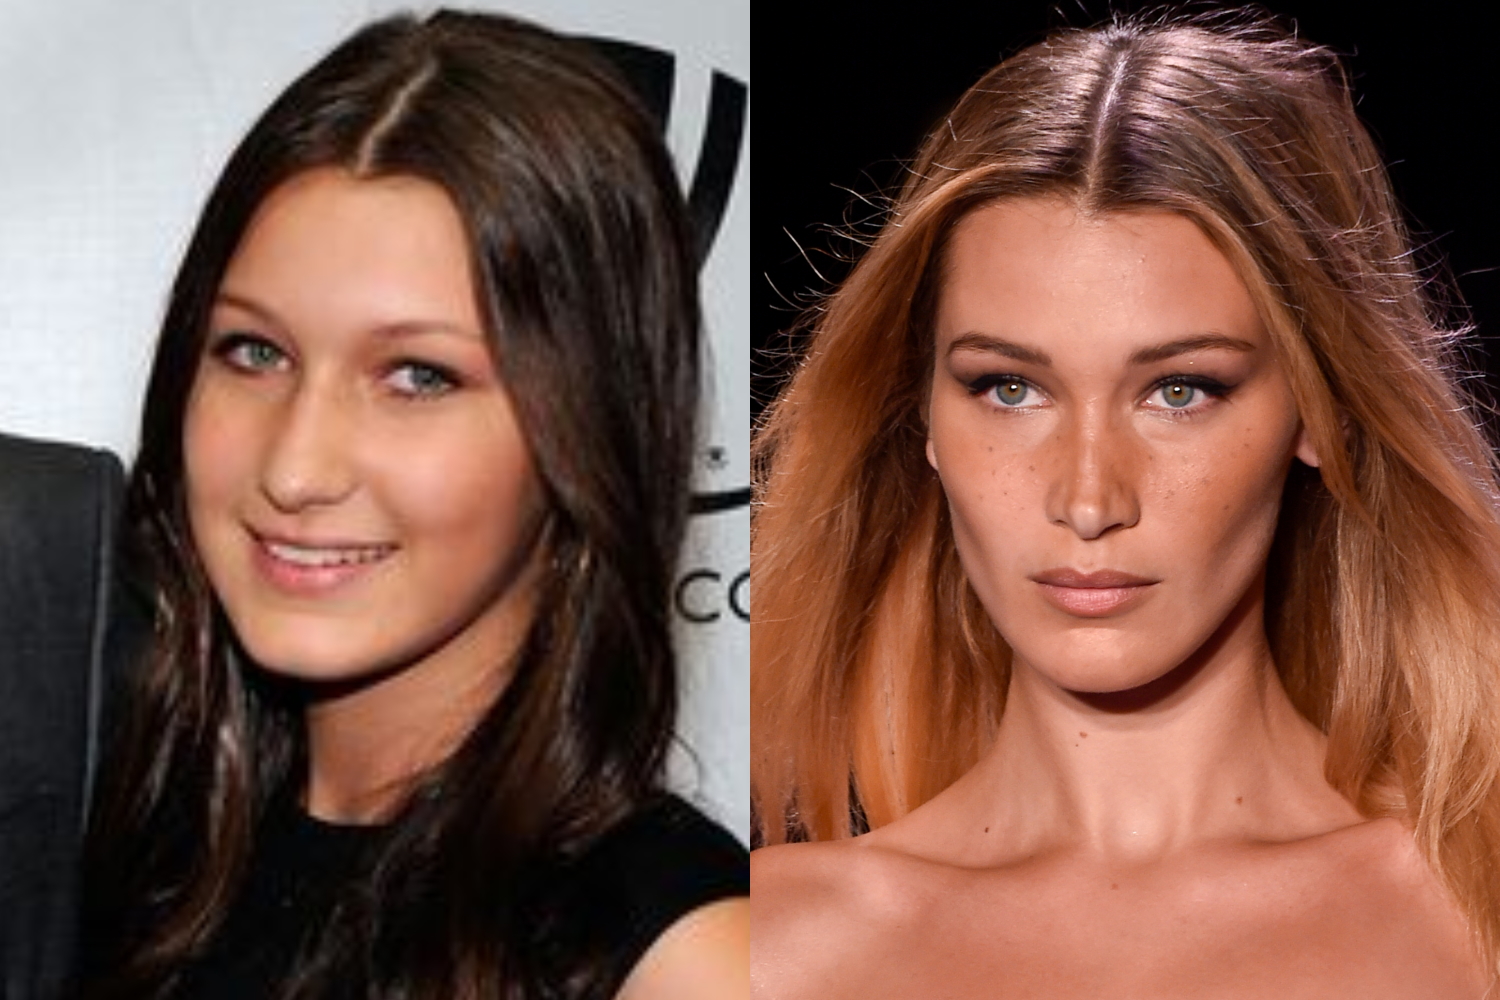 bella-hadid-before-and-after-plastic-surgery-1500-1000.jpg